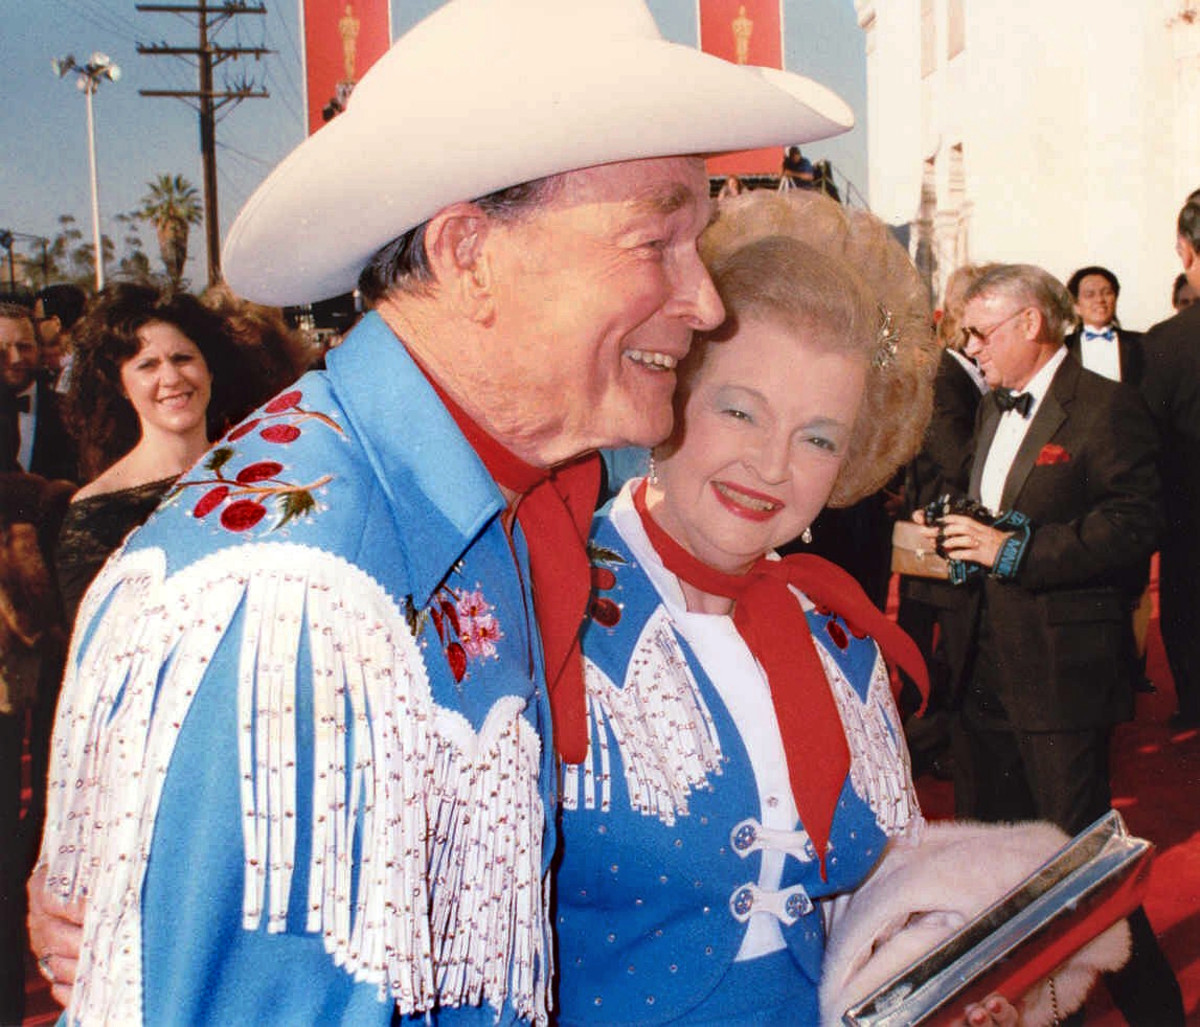 Dale Evans and Roy Roger at the 61st Academy Awards.